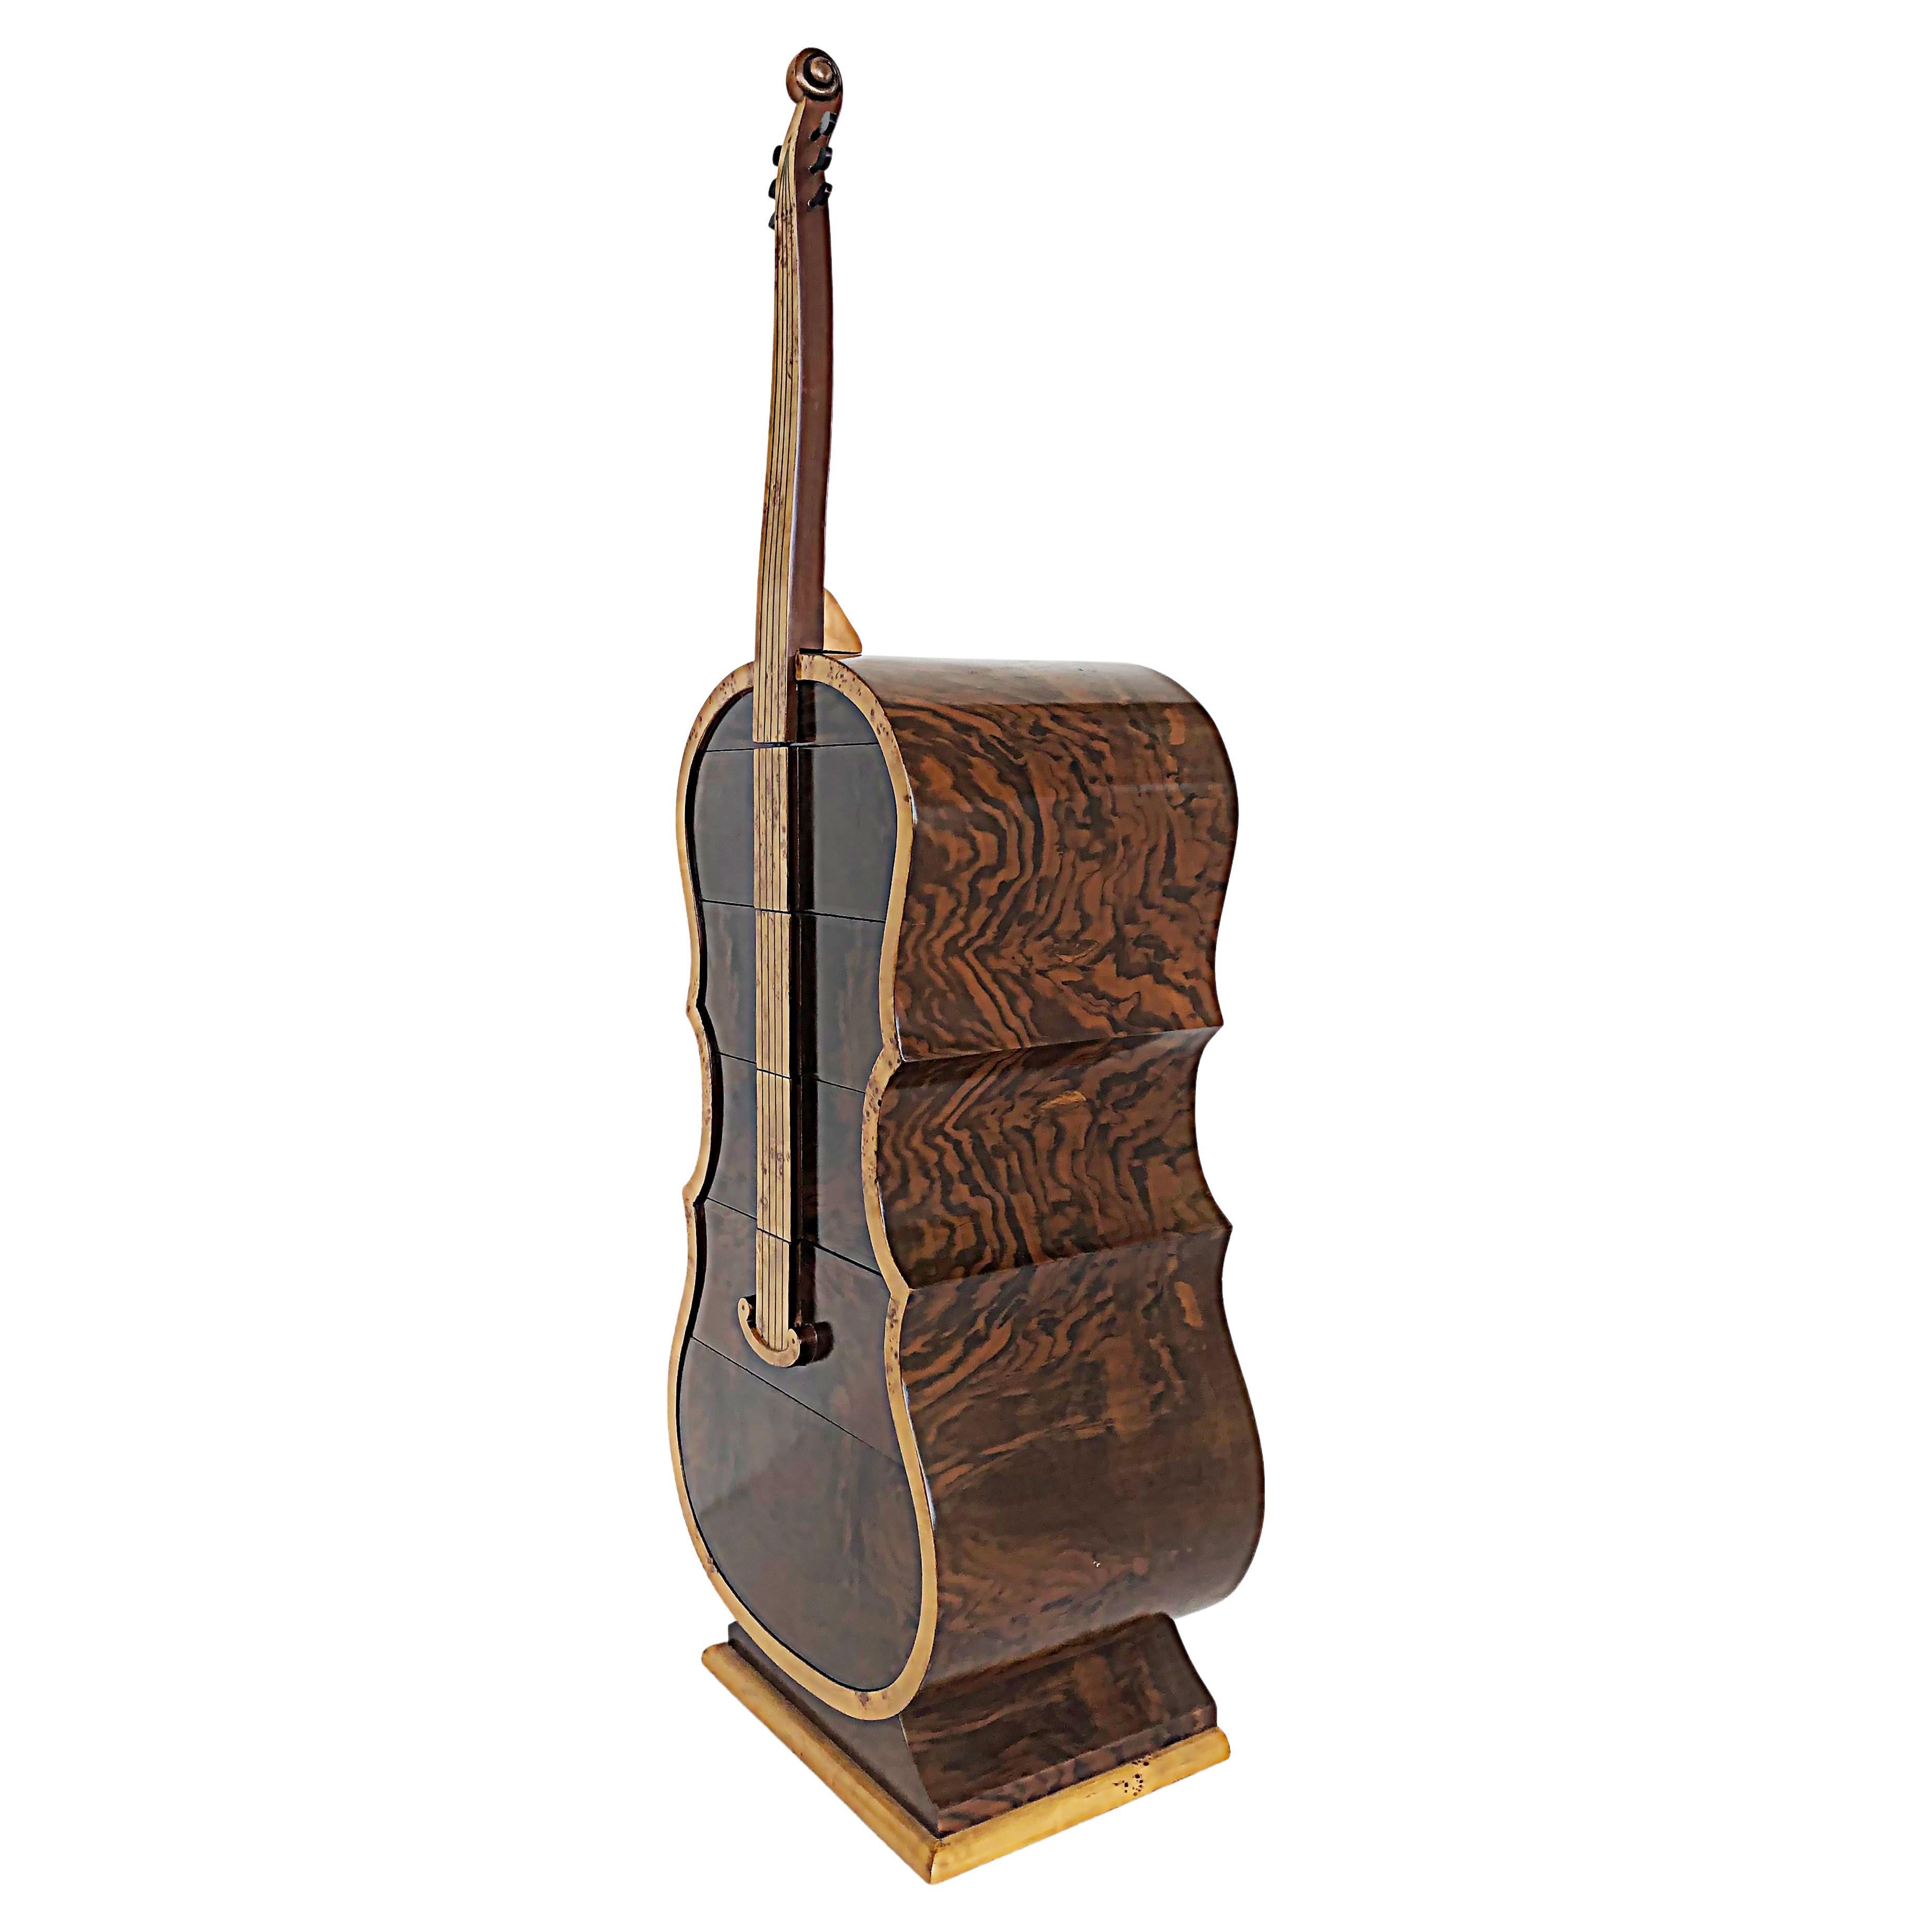 Art Deco-Style Whimsical Burl Wood Cello Shaped Cabinet with Secret Compartment